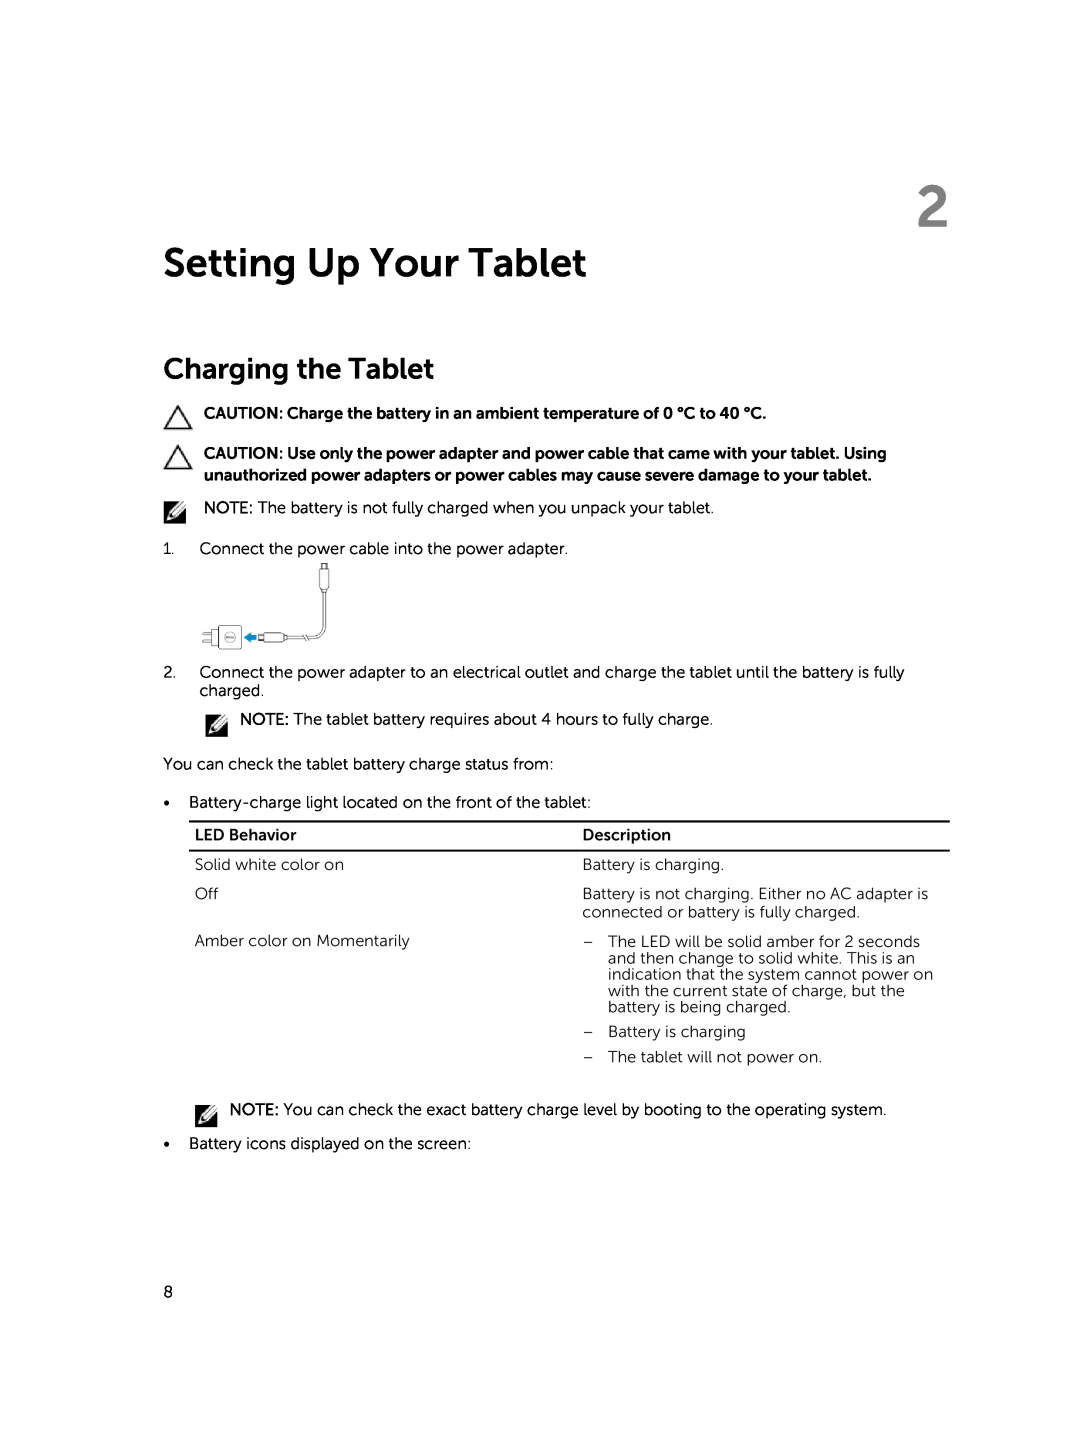 Dell T07G manual Setting Up Your Tablet, Charging the Tablet 